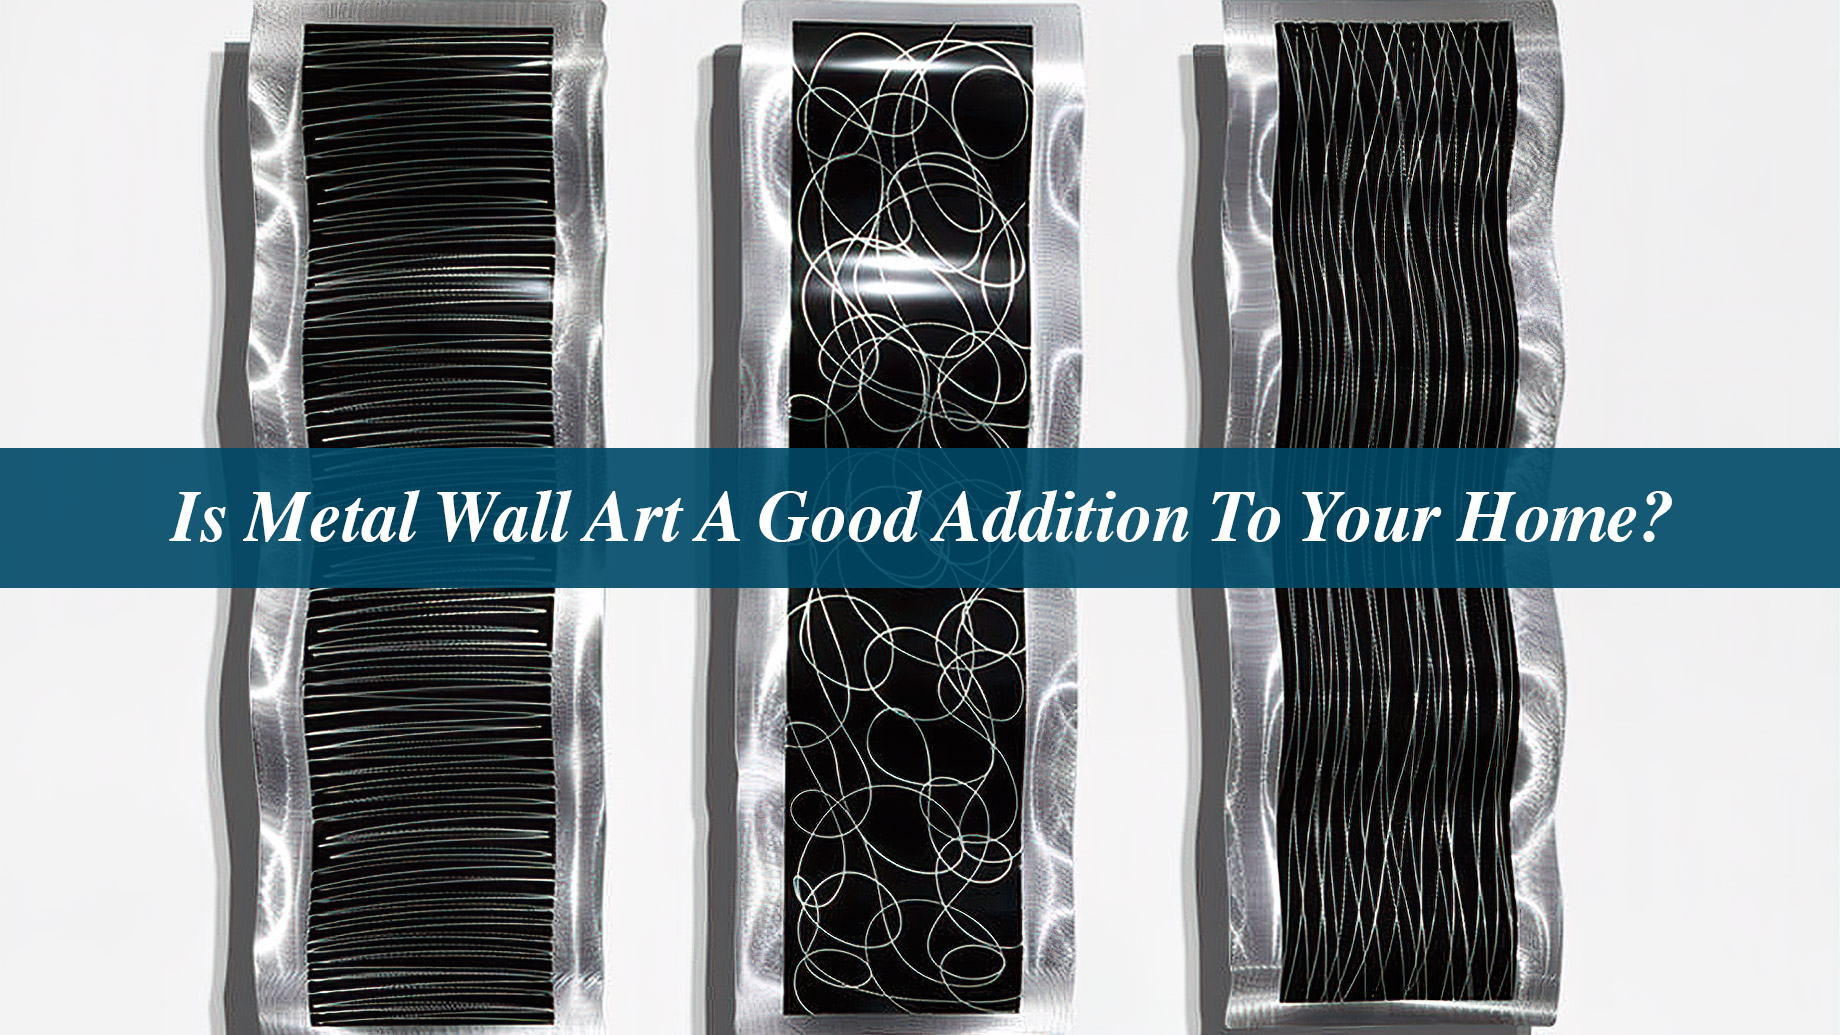 Is Metal Wall Art A Good Addition To Your Home?